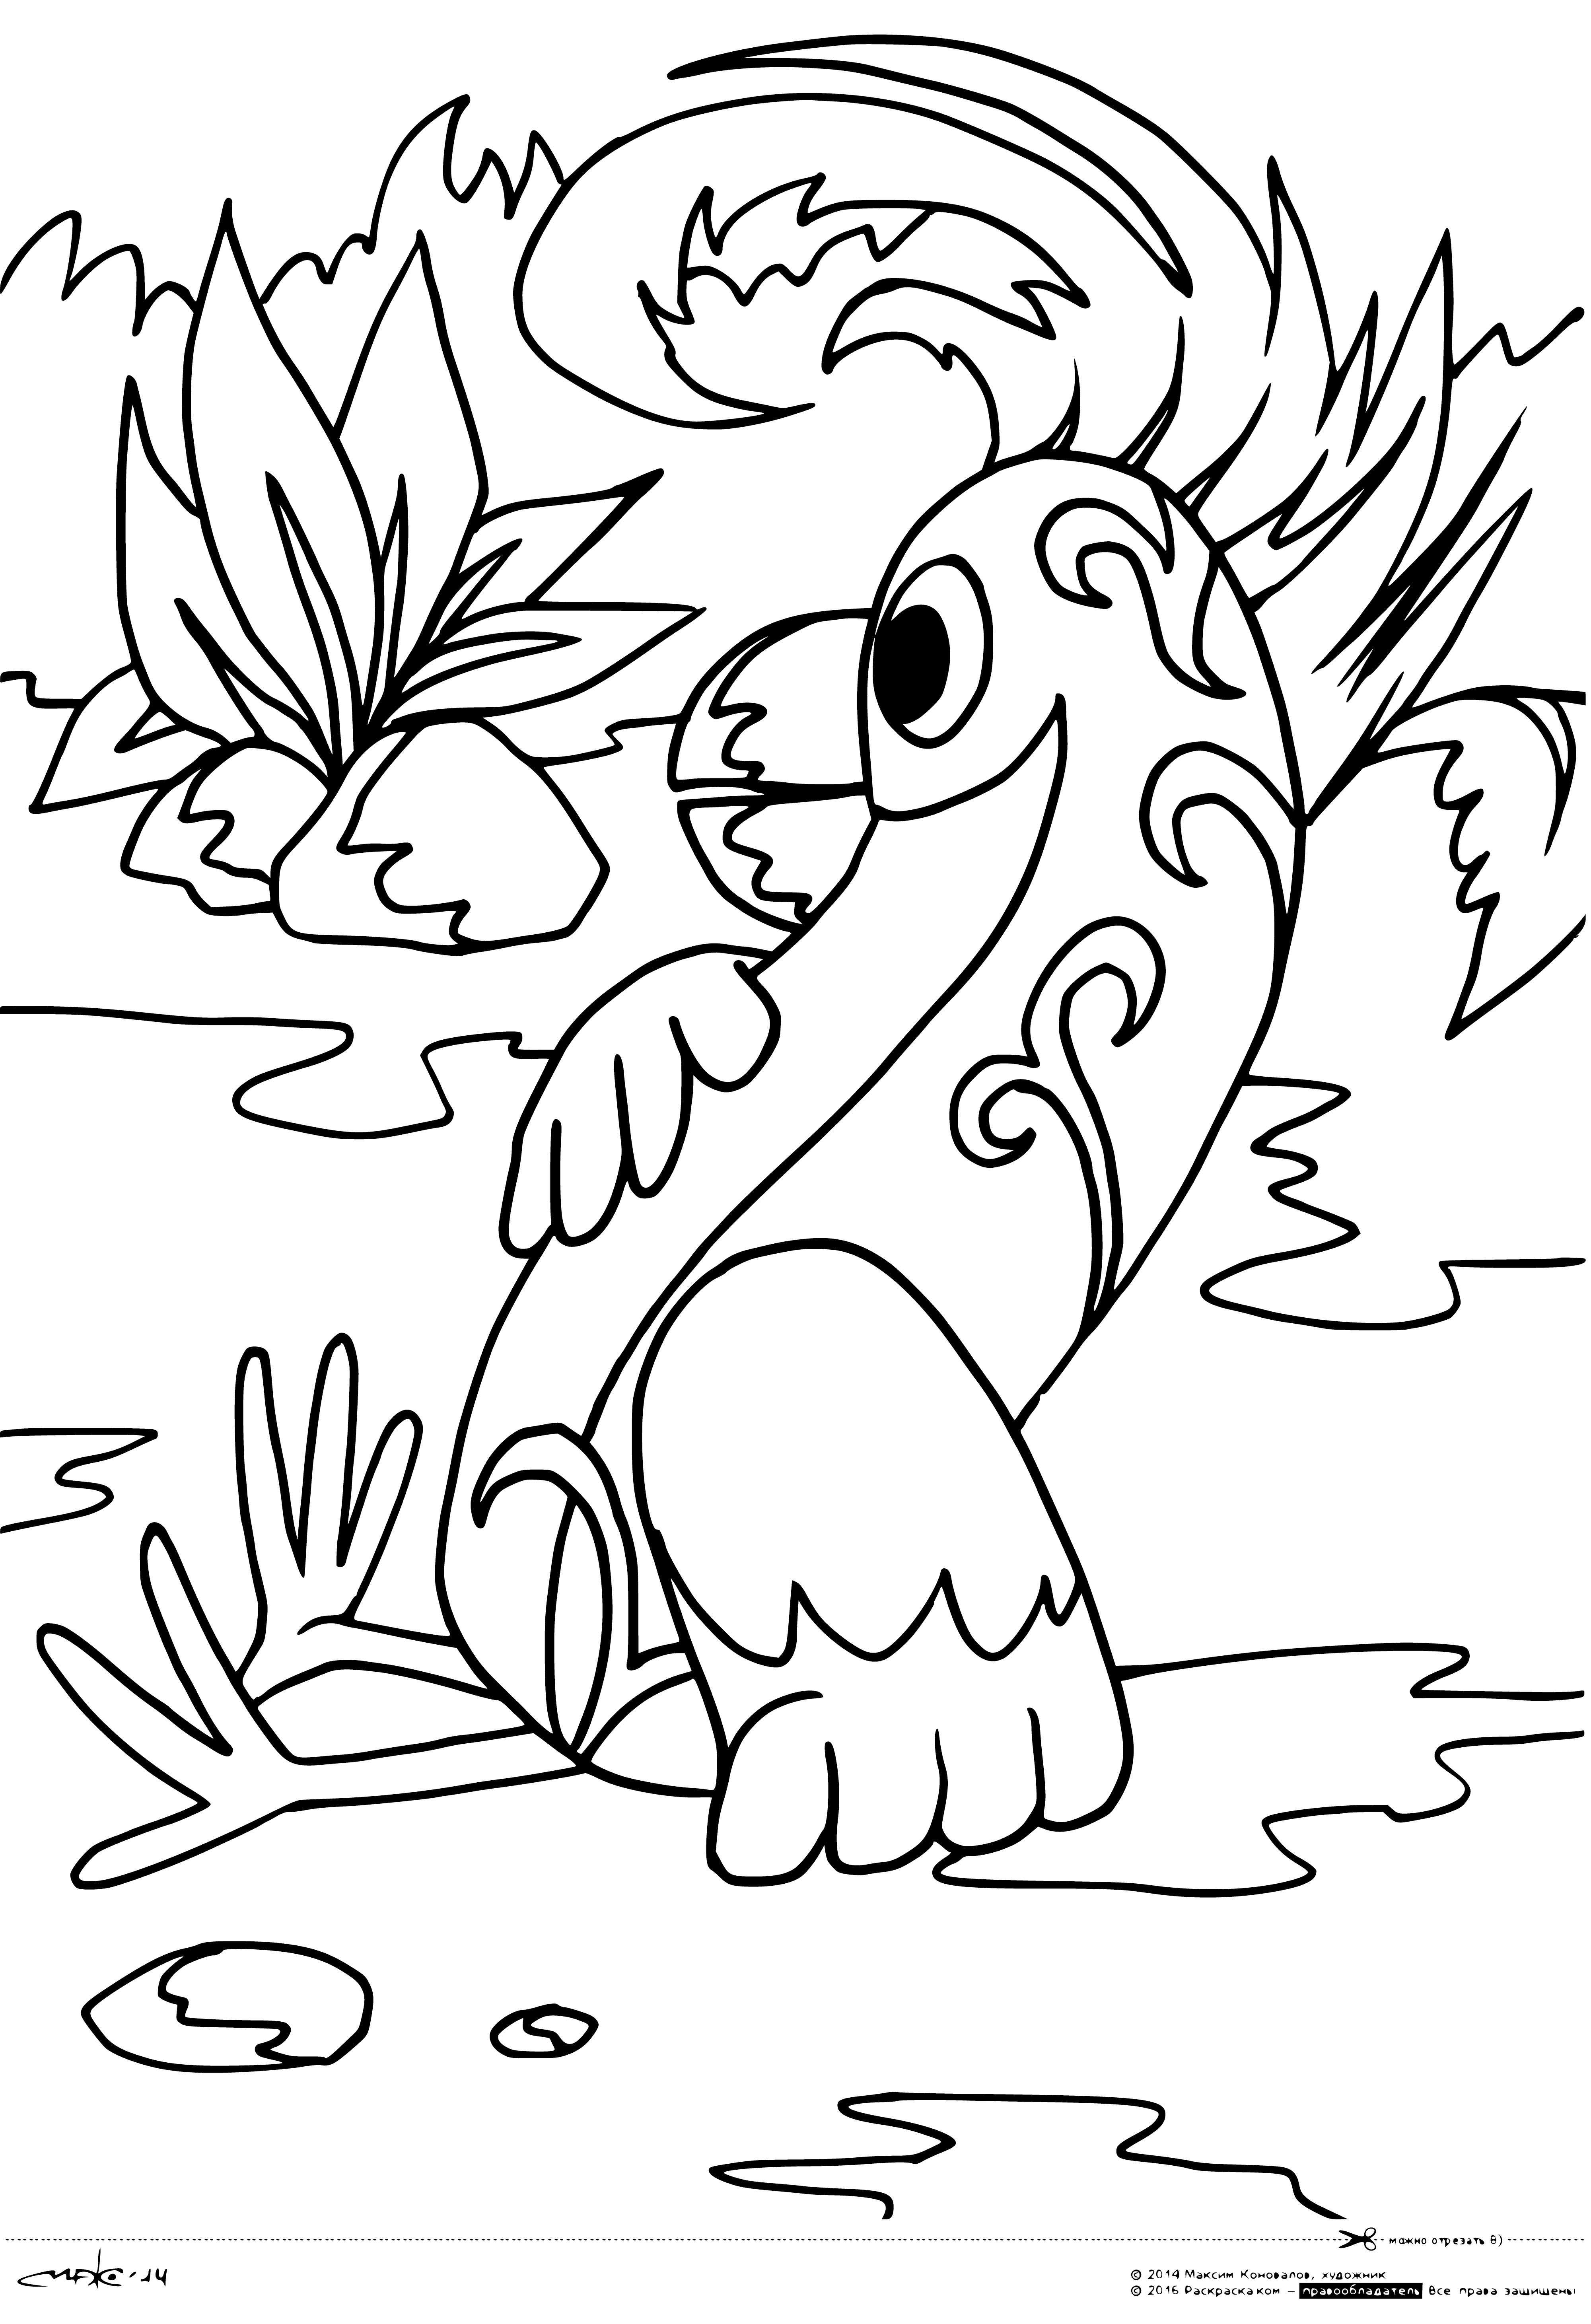 coloring page: 38 parrots of various colors perch on a branch facing forward, some with wings outstretched & beaks open.